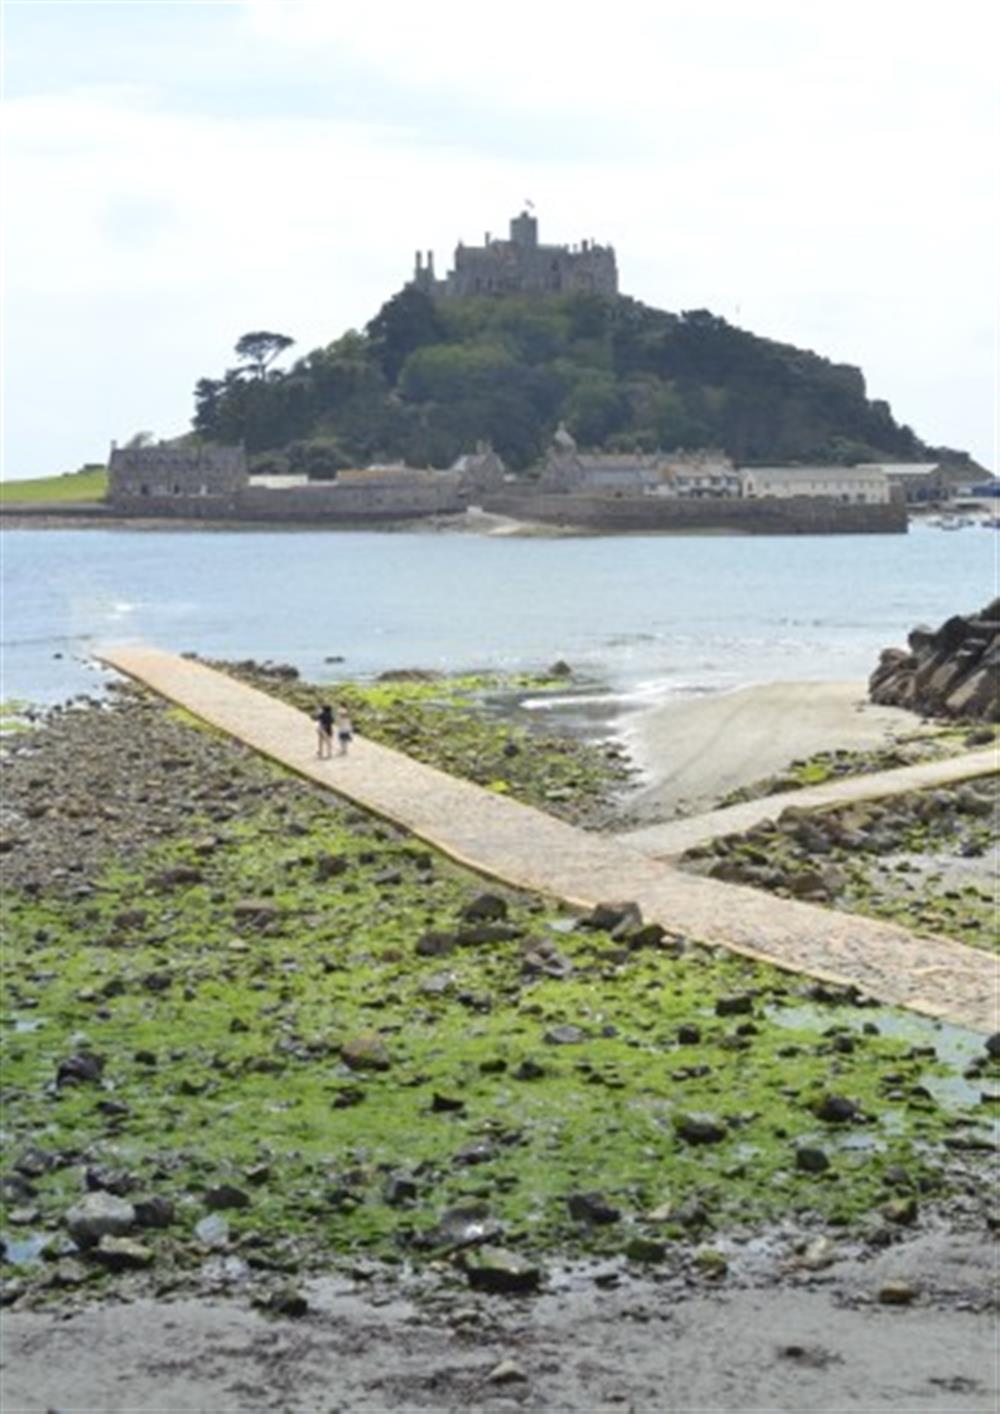 St Michael's Mount is  45 minute drive - cross the causeway (if the tide is out!) or catch the boast across.